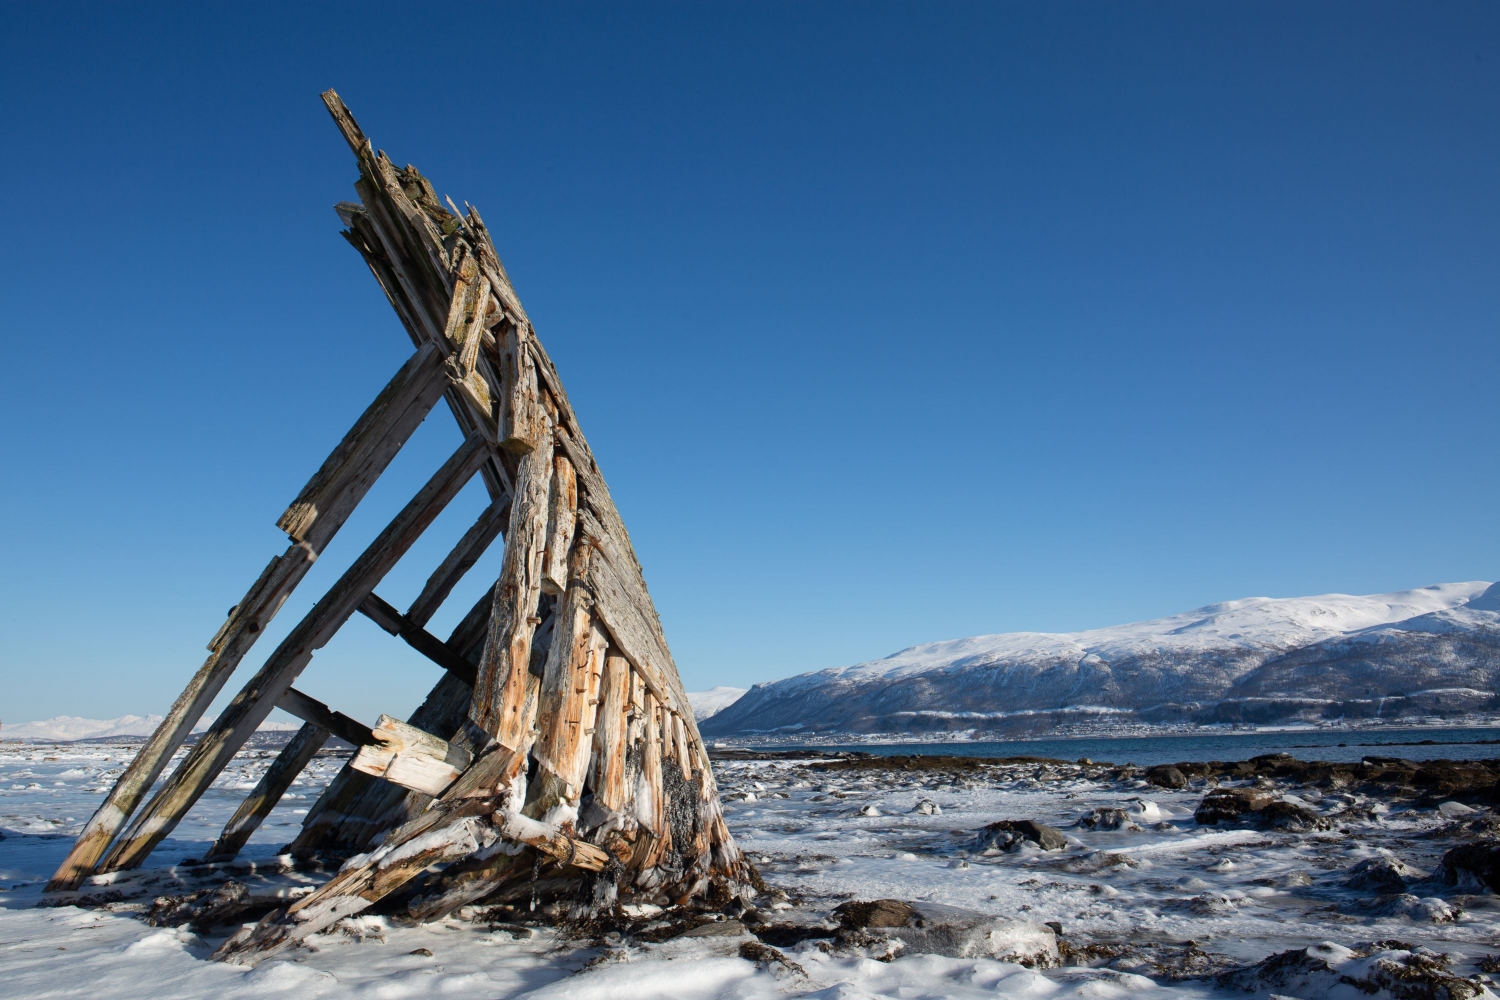 Authentic Fjords – your gateway to the wilderness